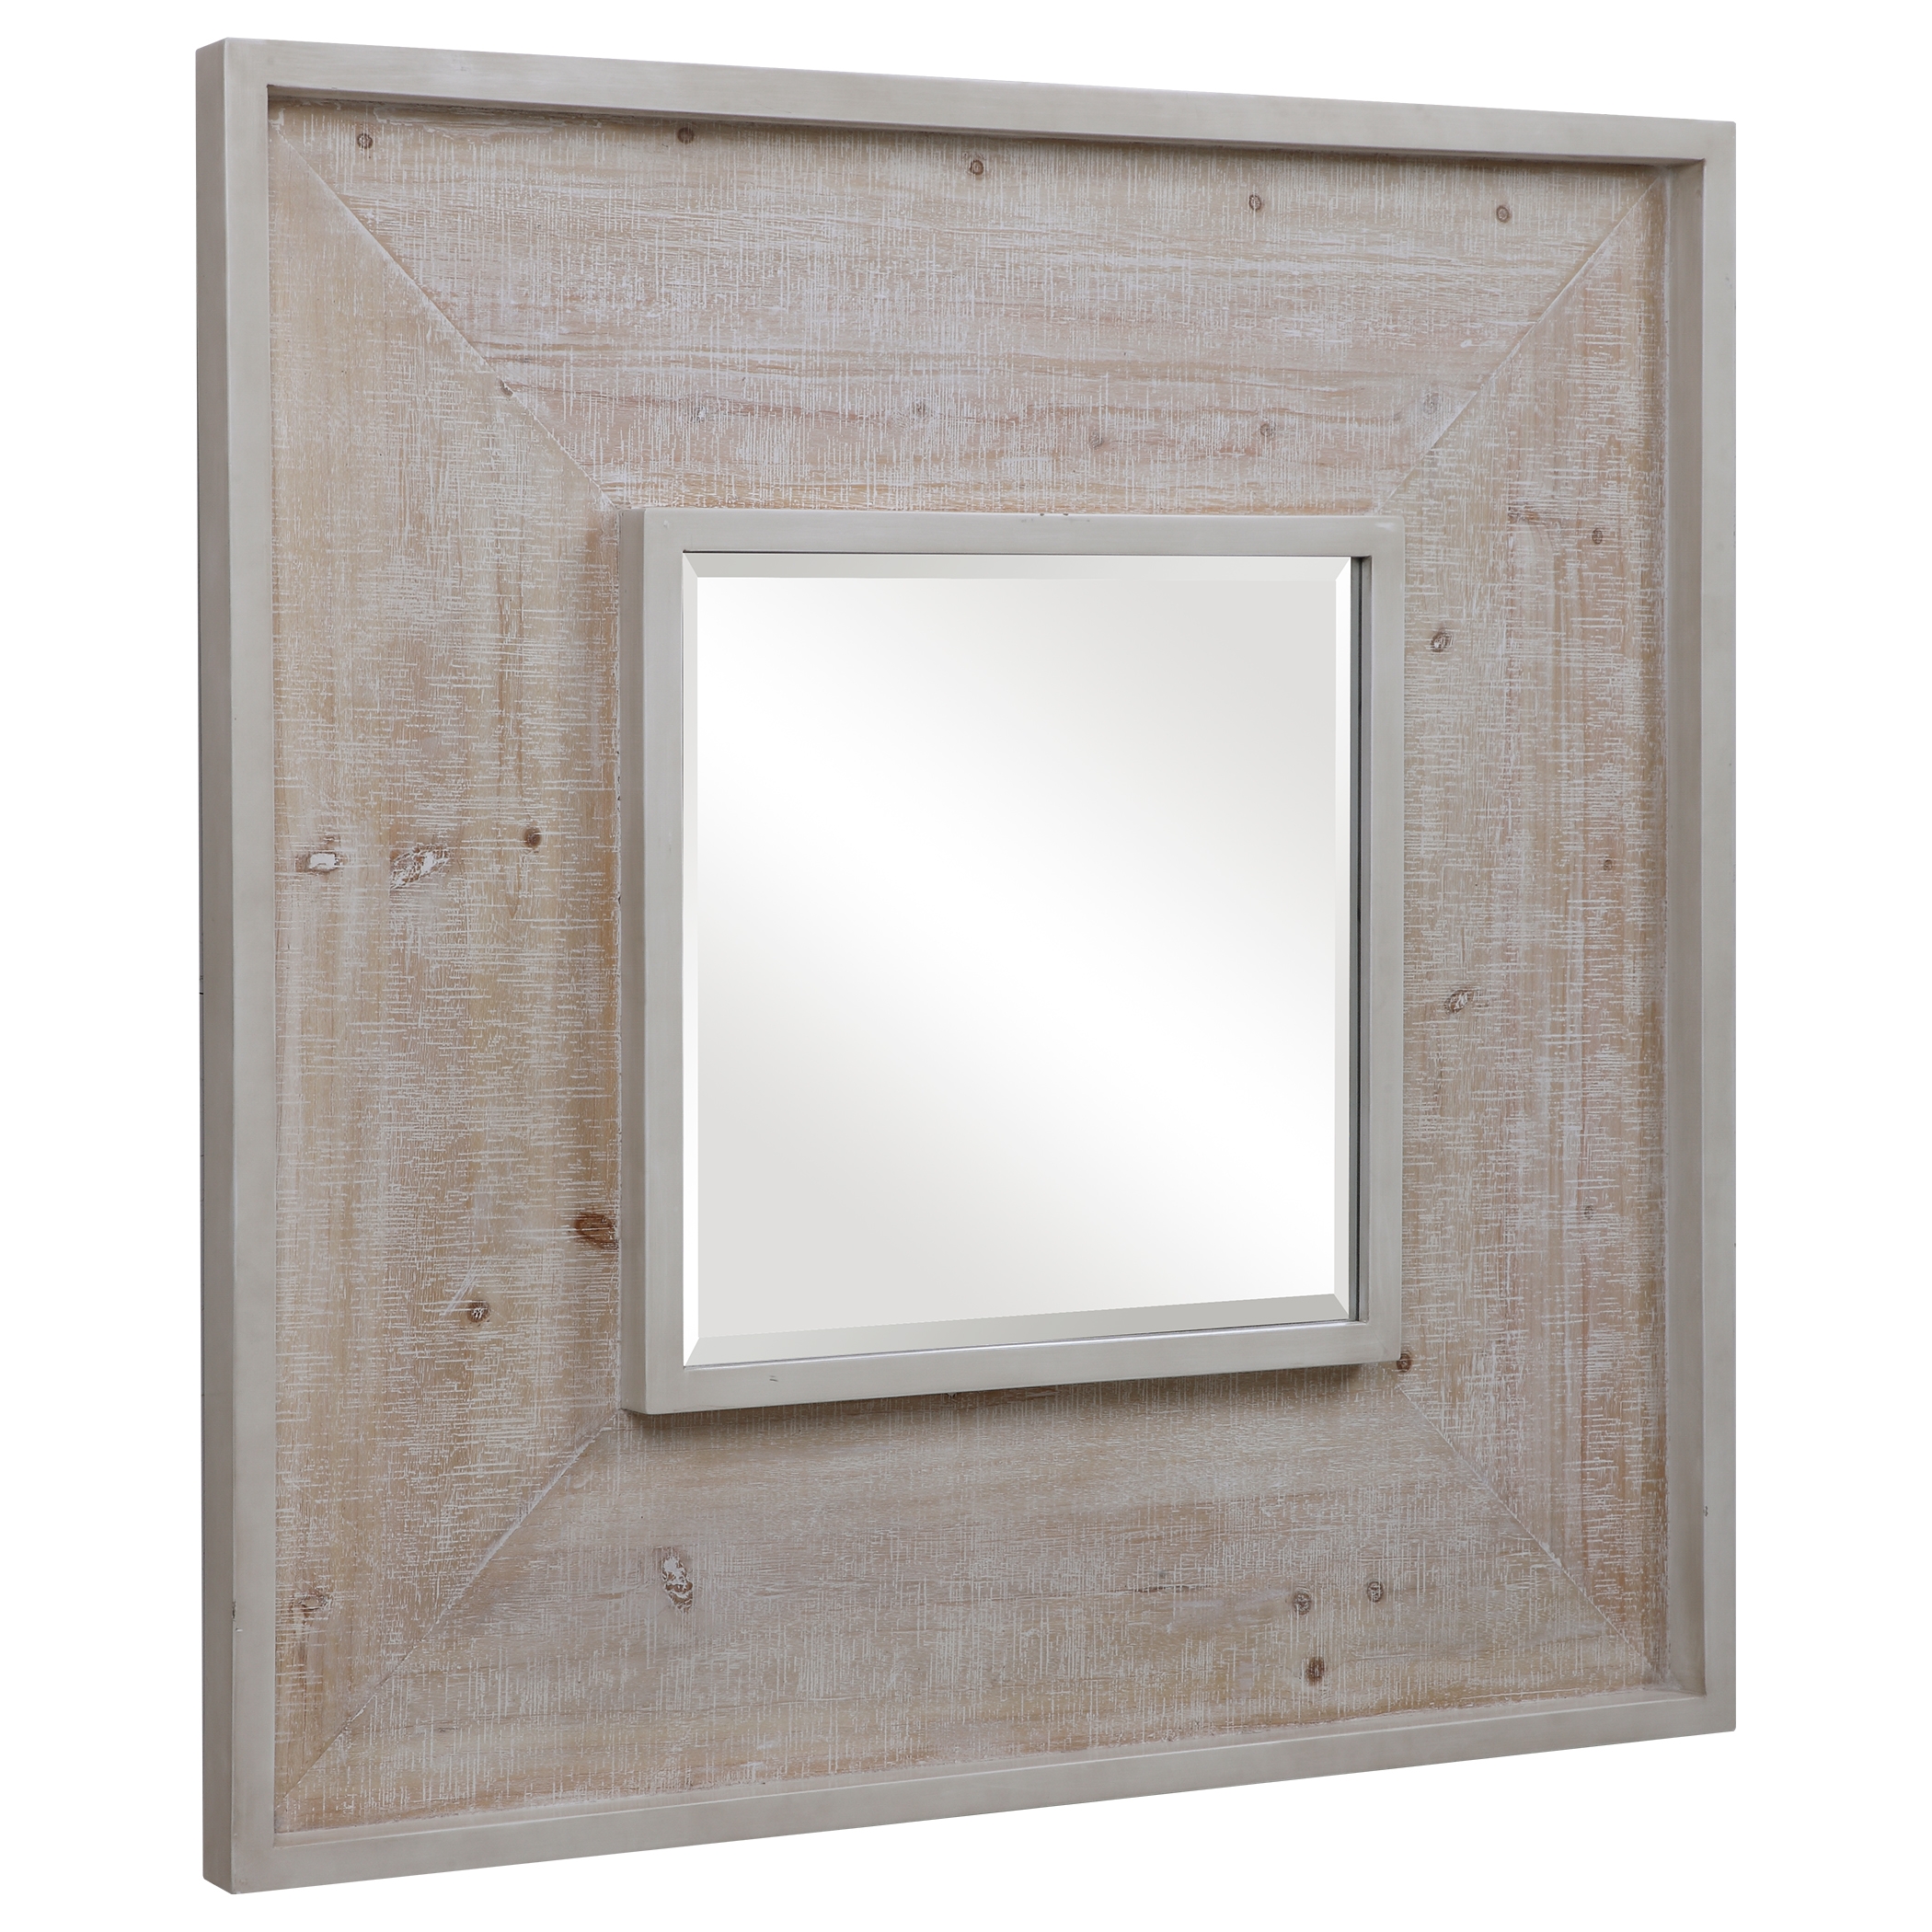 Alee Driftwood Square Mirror - Image 4